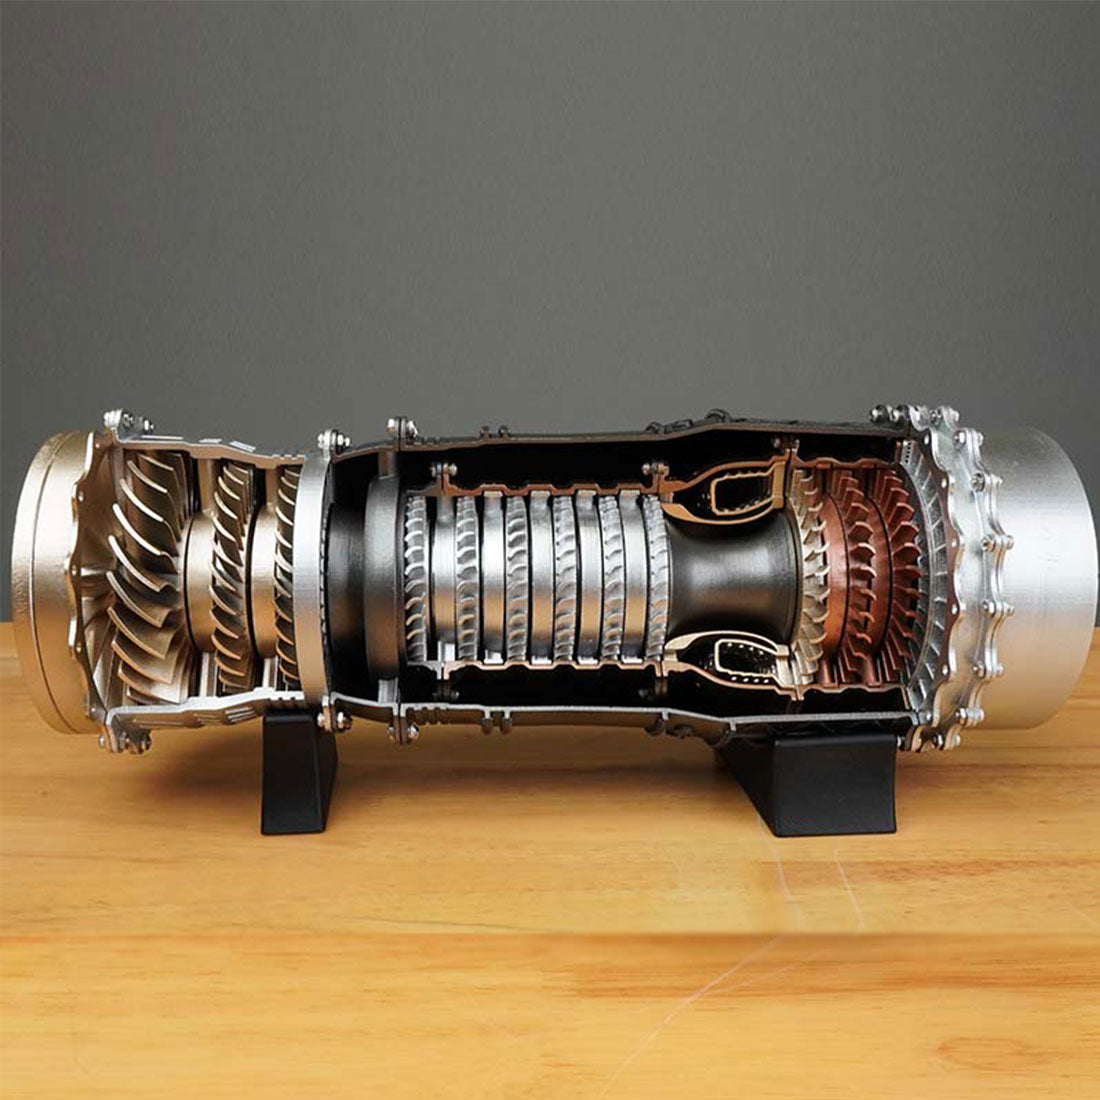 3D Printed Turbofan Frighter Engine Model Assembly Electric Model 1/20 Scale WS-15(150+ PCS)